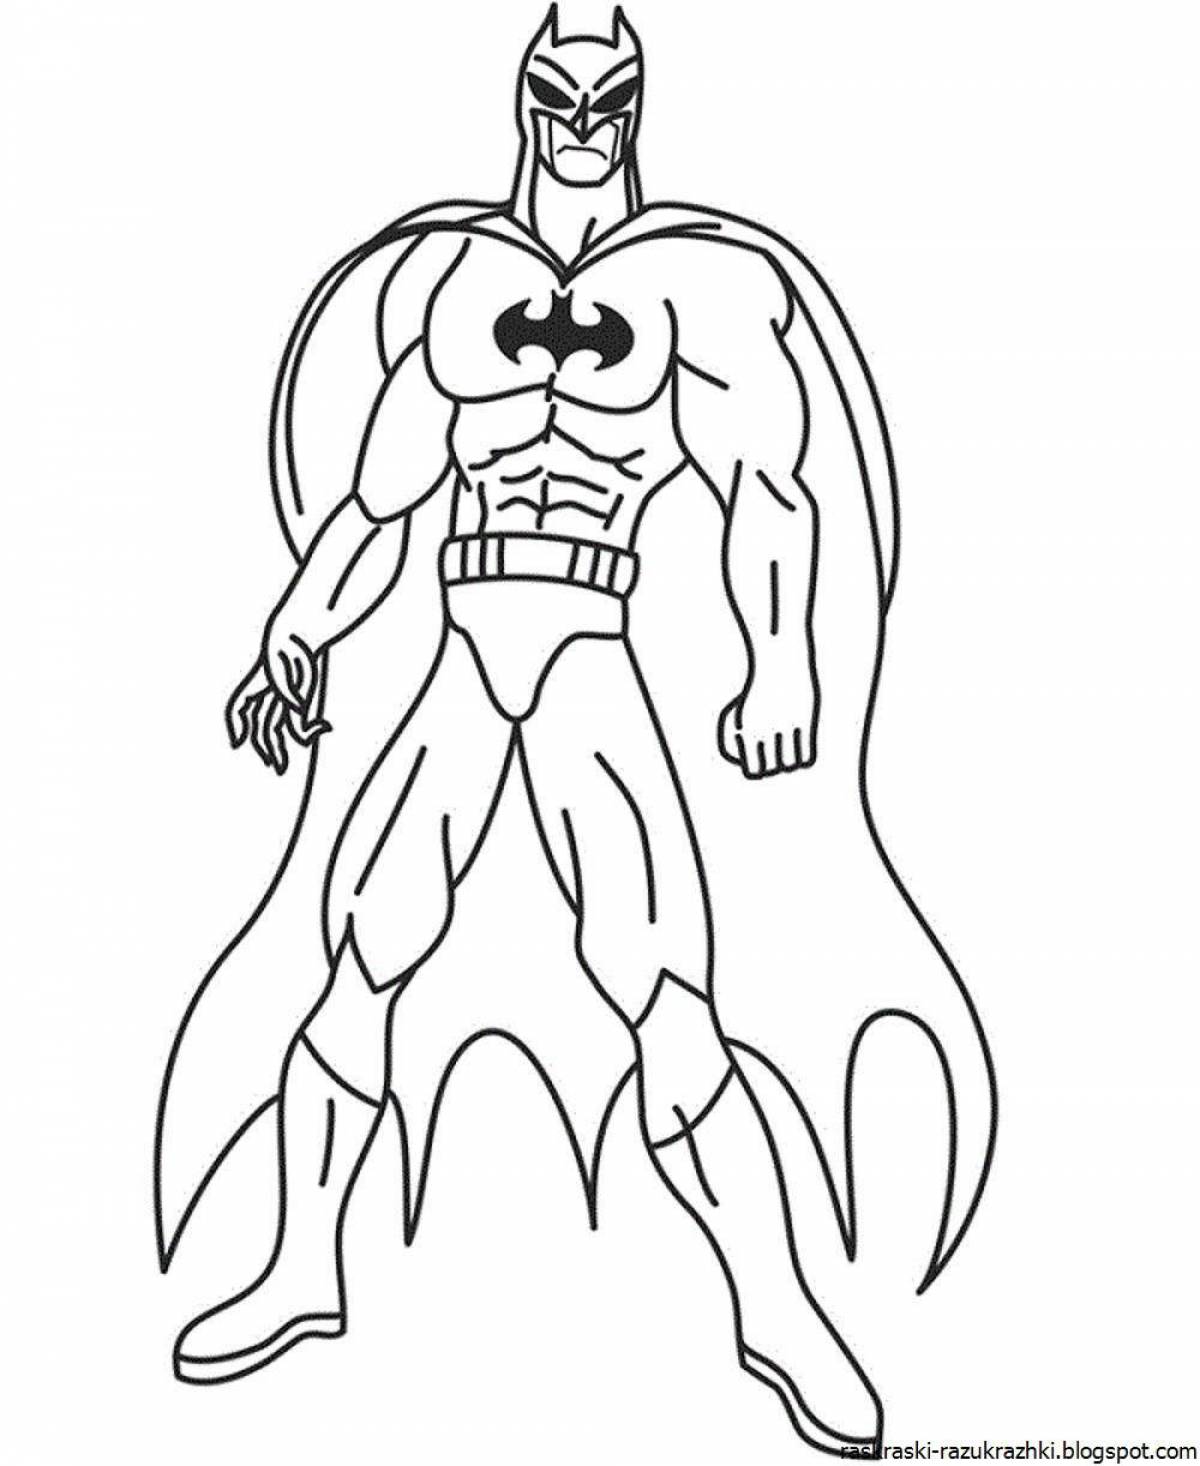 Awesome superhero coloring pages for kids